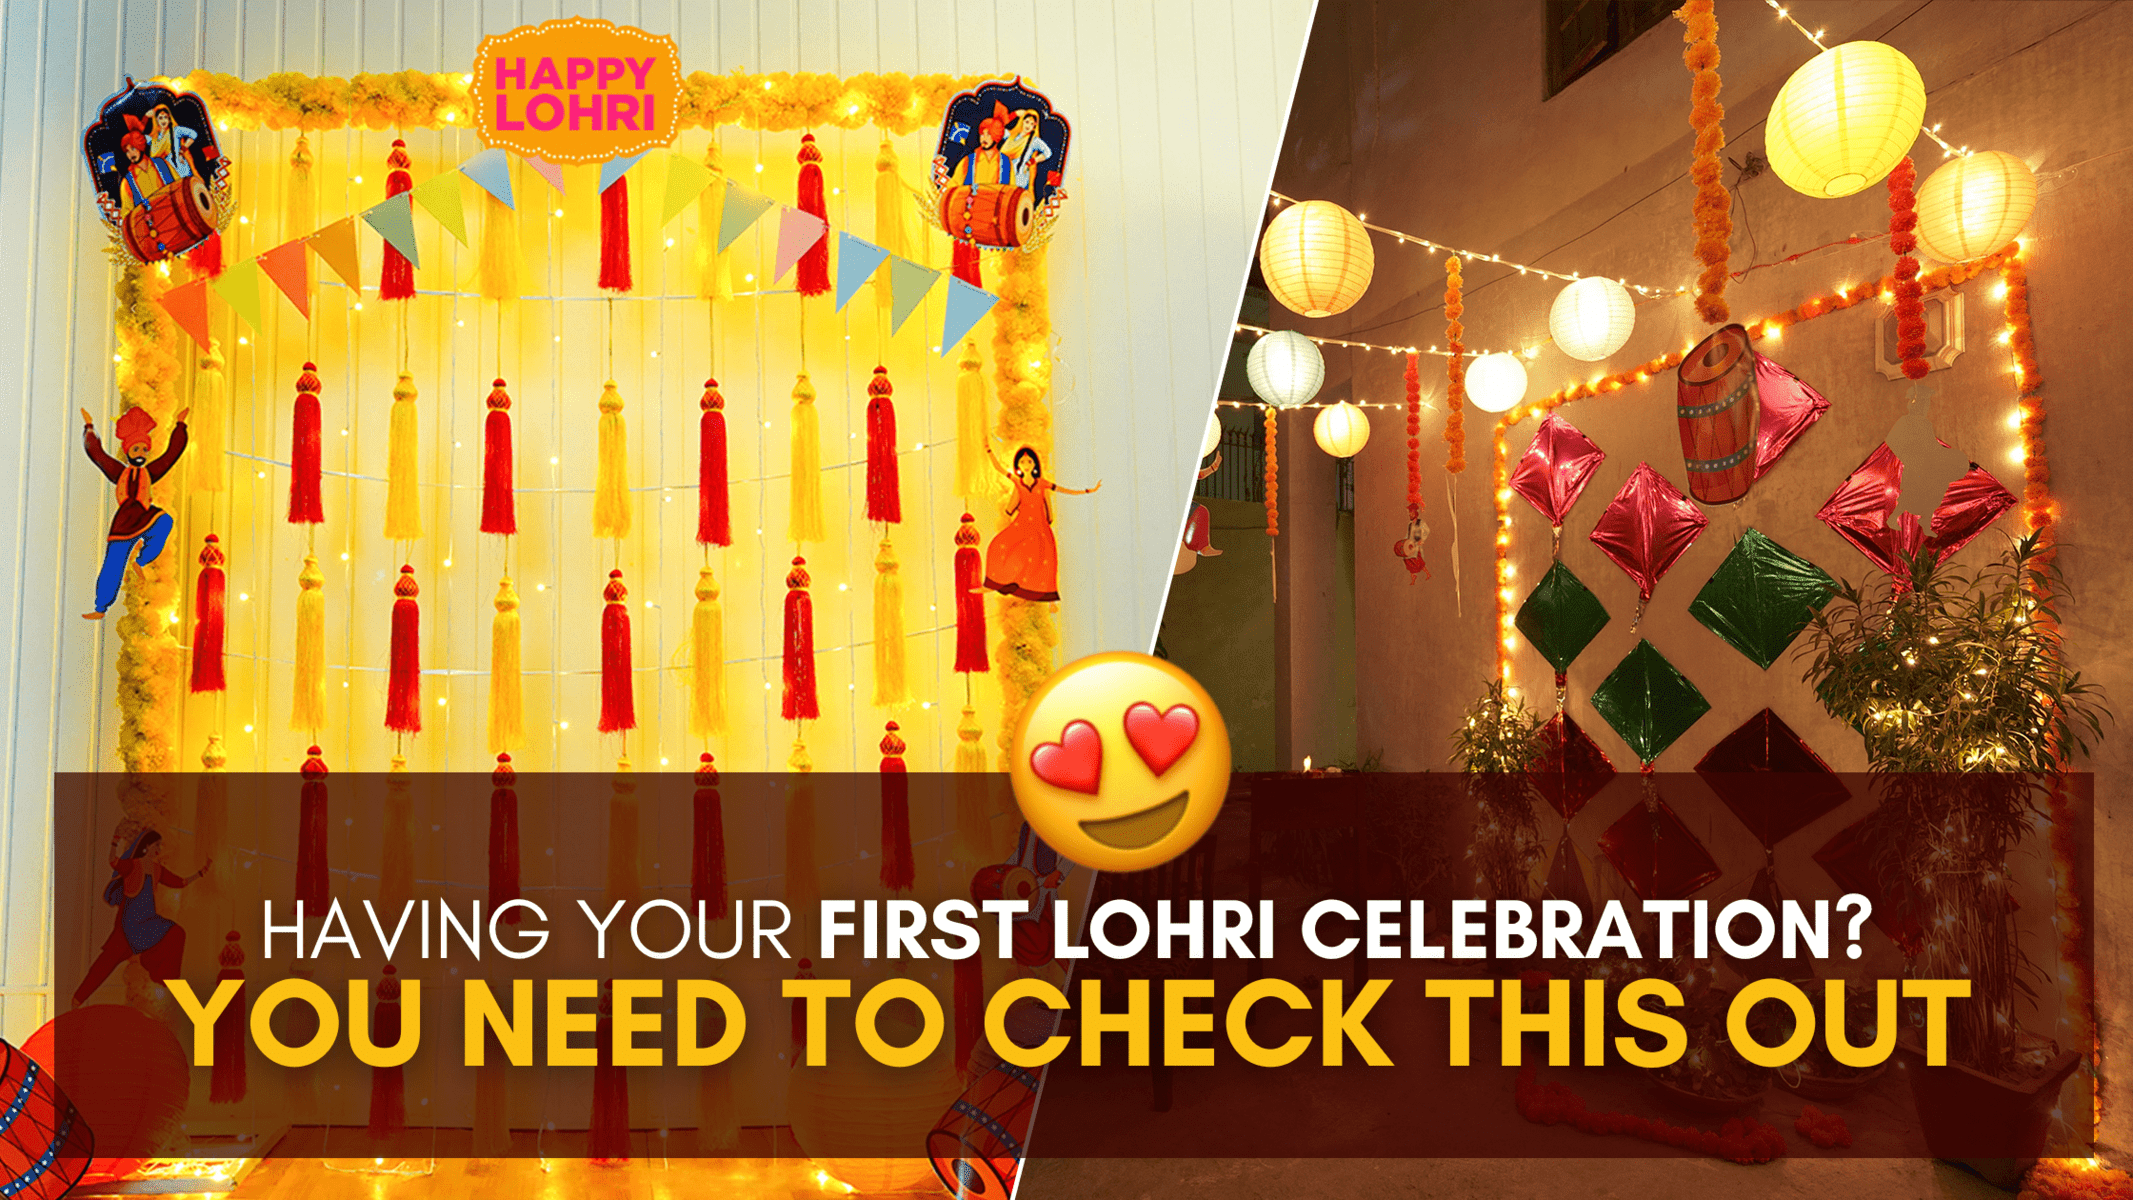 10 Amazing Lohri Decoration Ideas for an awesome First Lohri Celebrations- 2023 Edition